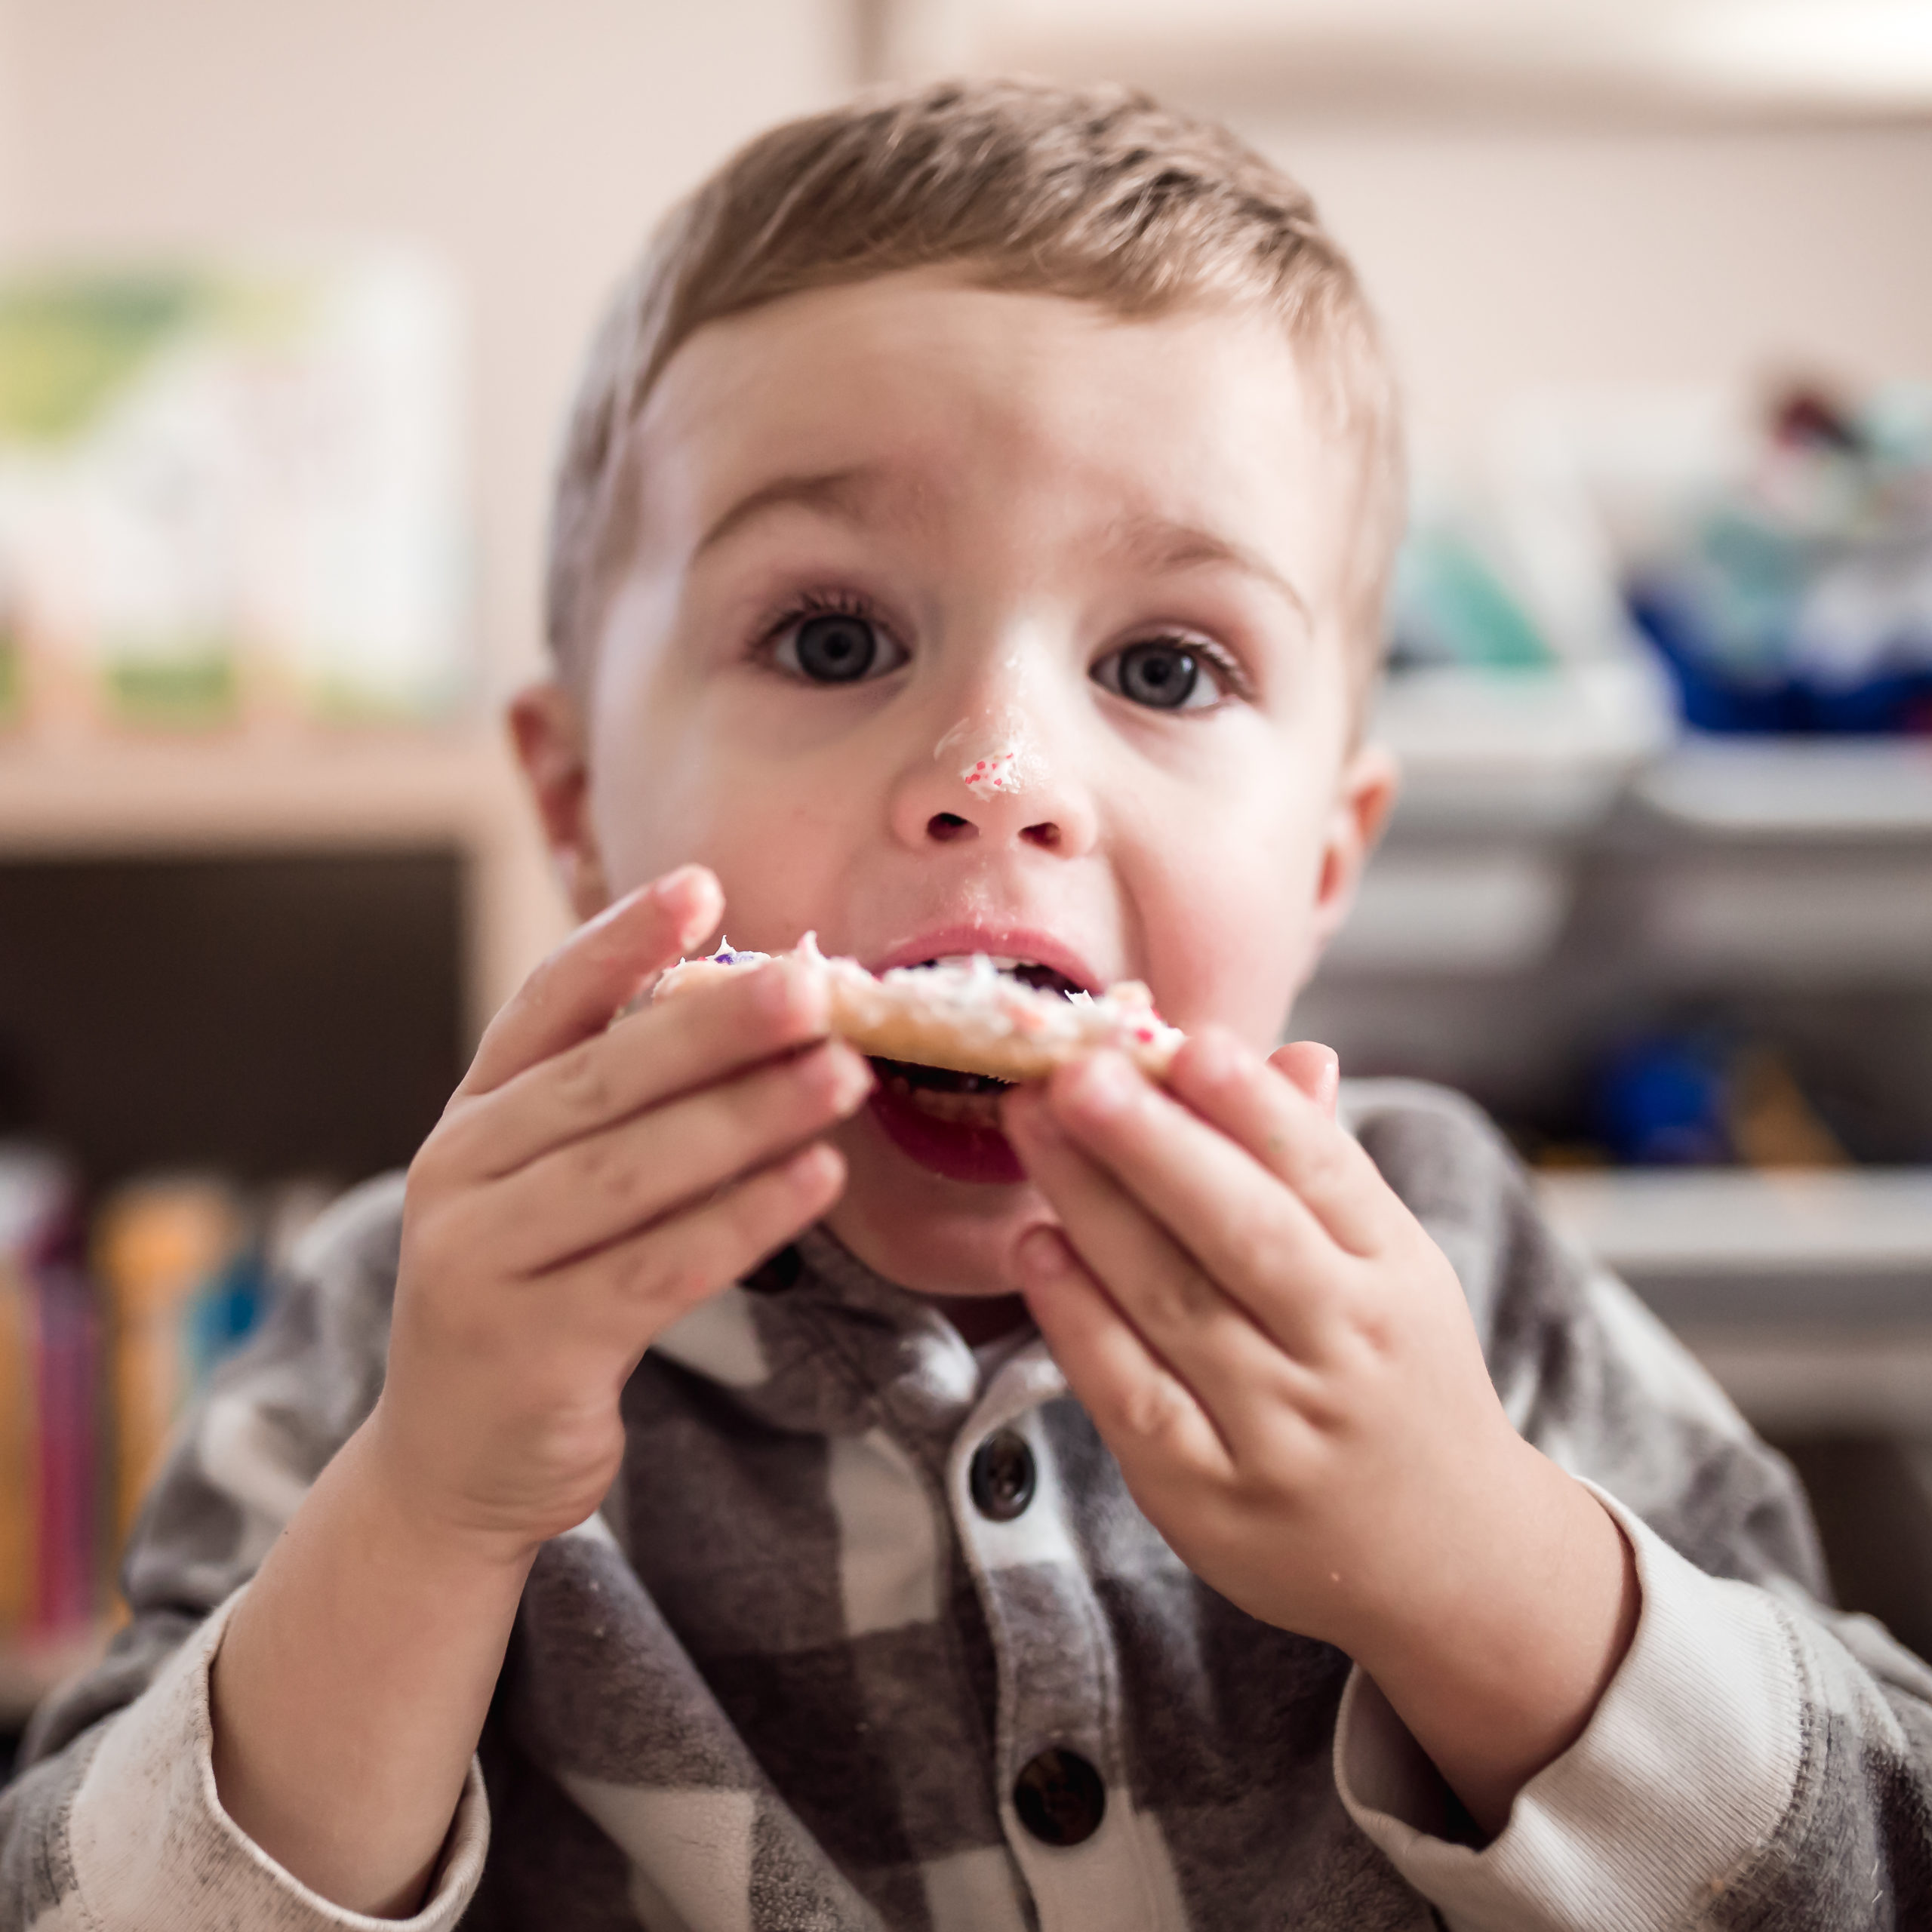 Keep kids happy with this cookie recipe. Little boy is eating a cookie and looking at the camera with wide eyes.